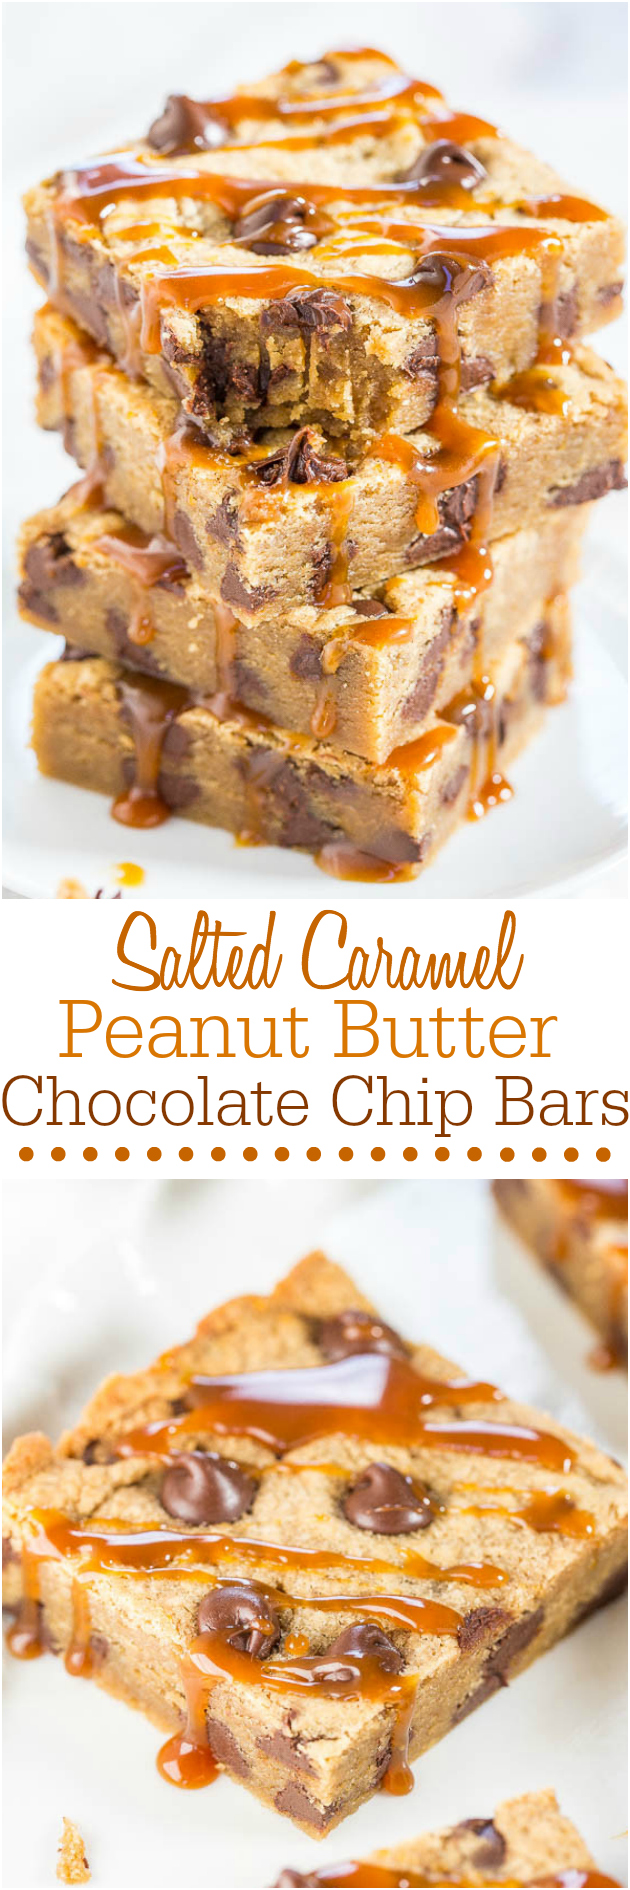 Salted Caramel Peanut Butter Chocolate Chip Bars - Made with salted caramel PB (yes it's a thing!) Soft, chewy, gooey and so irresistible!!!